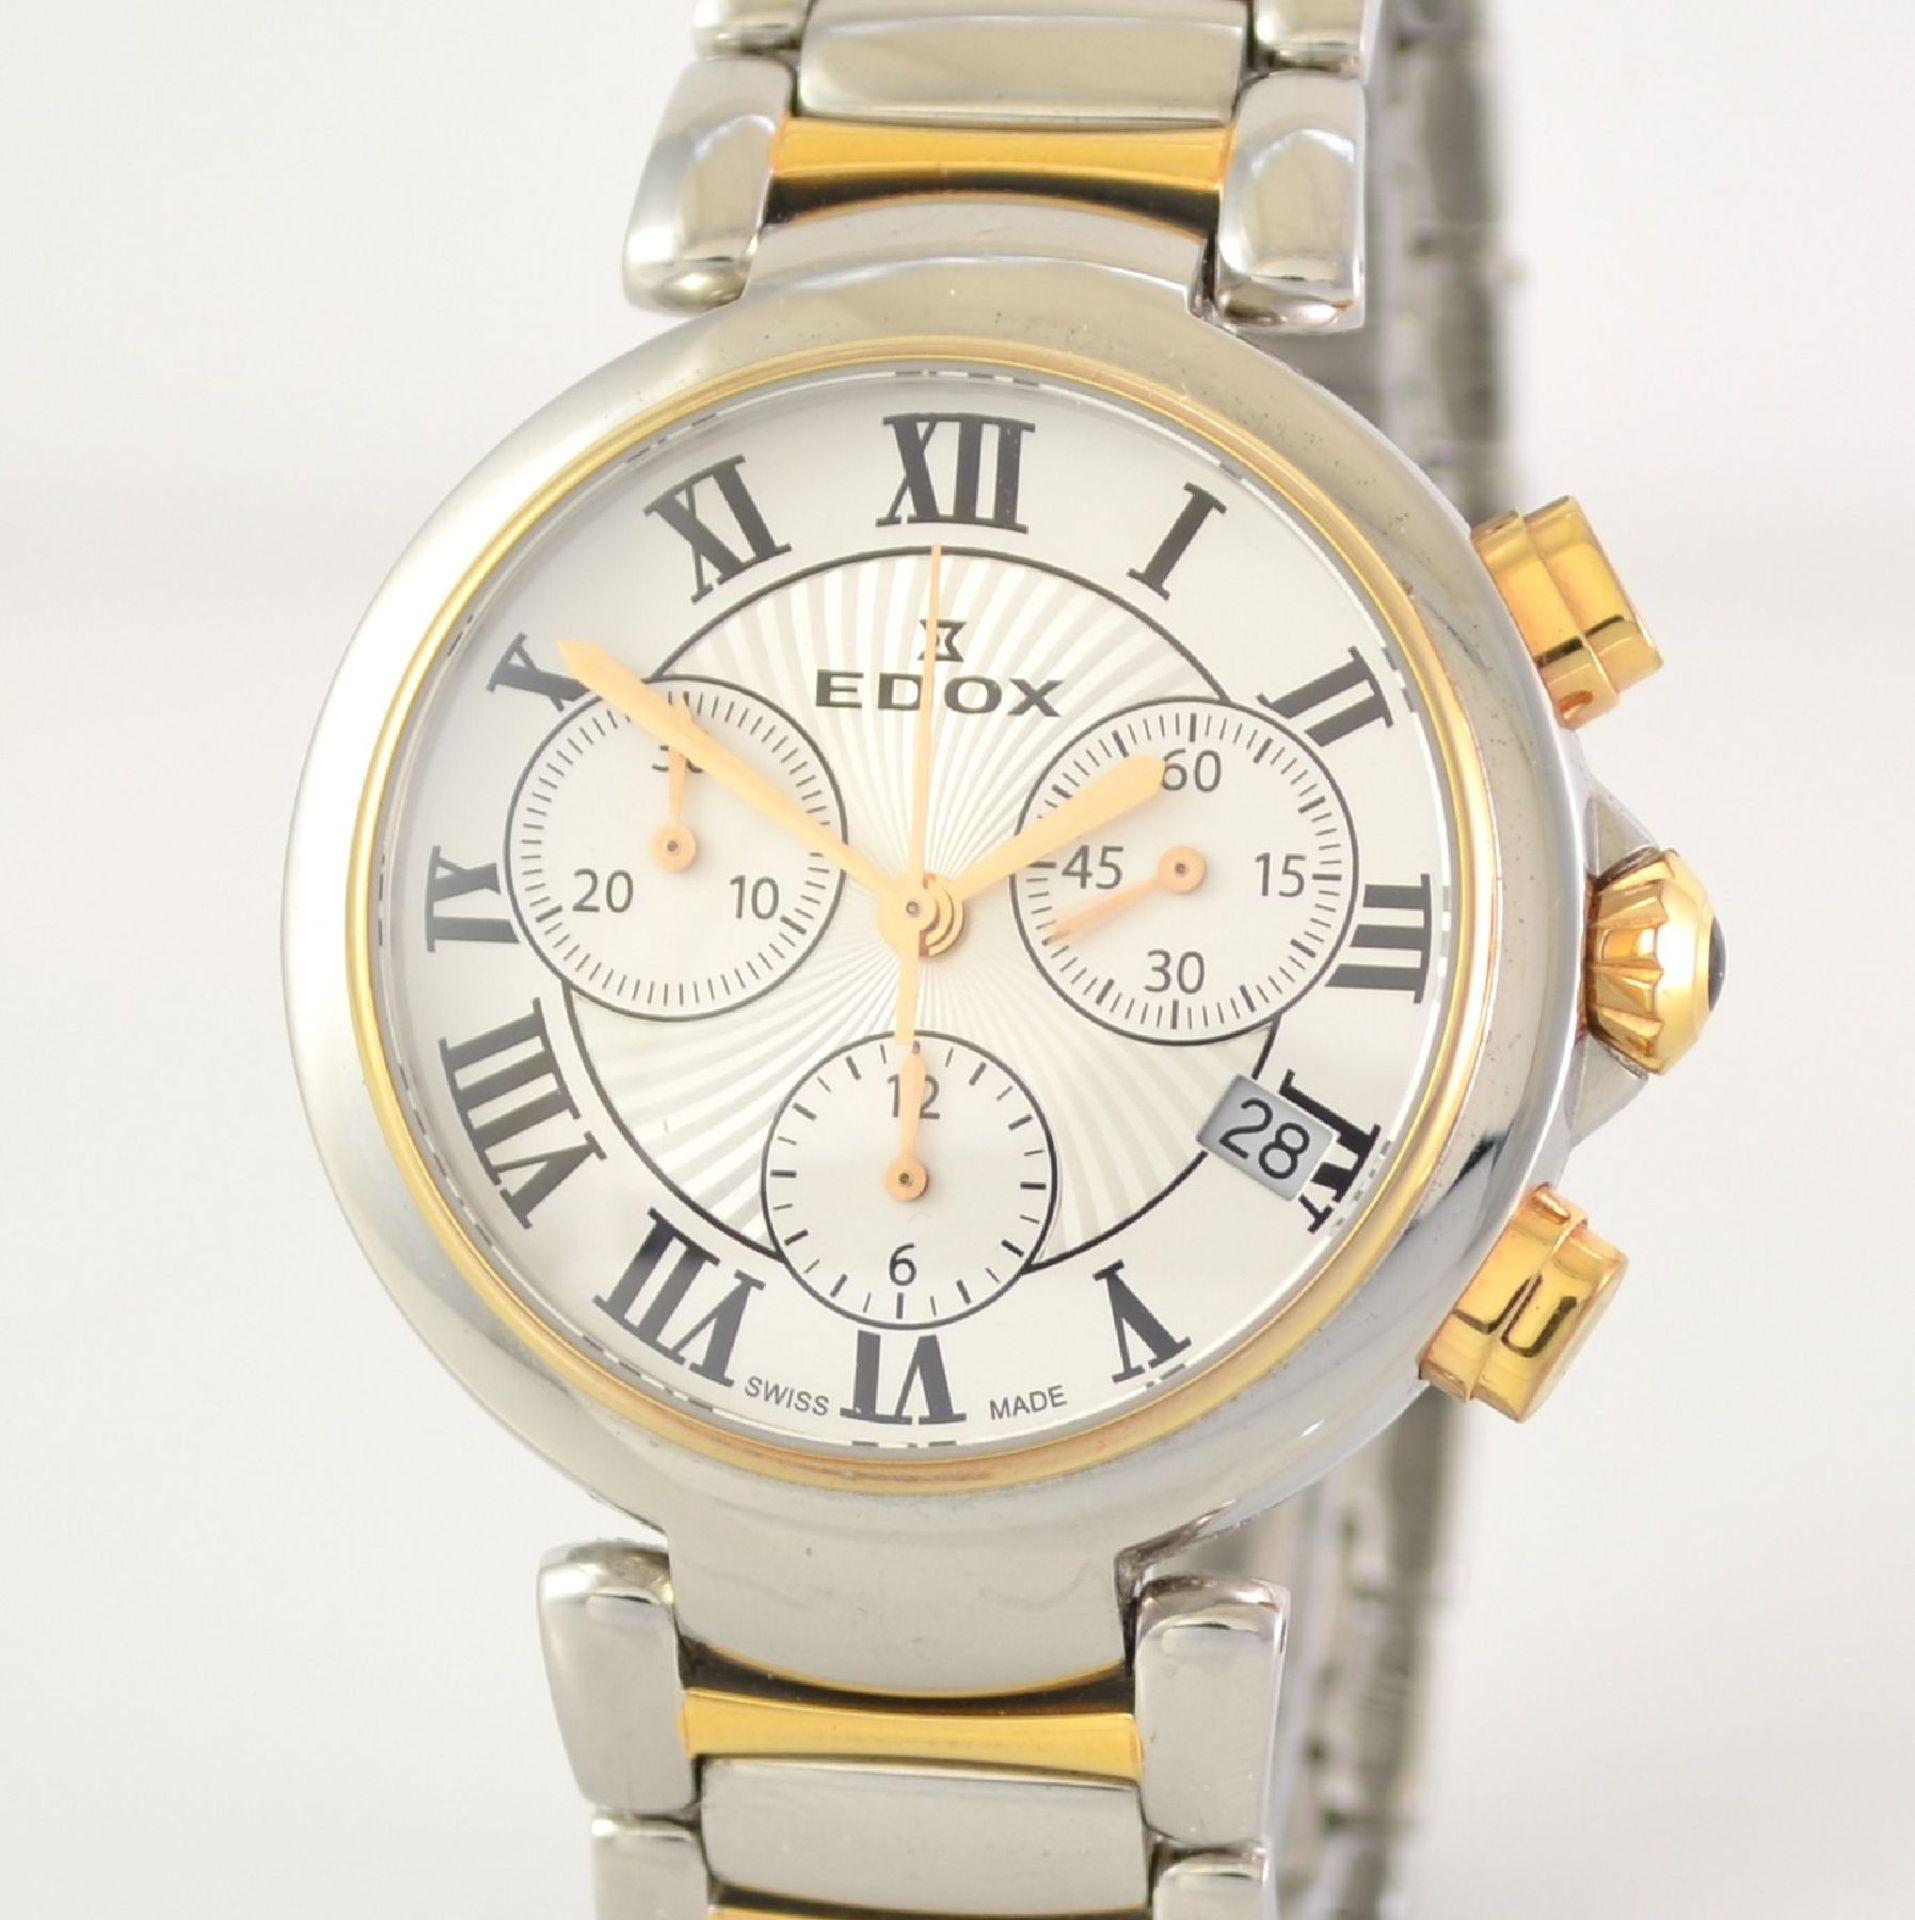 EDOX ladies wristwatch with chronograph La Passion, reference 10220, stainless steel case - Bild 4 aus 7